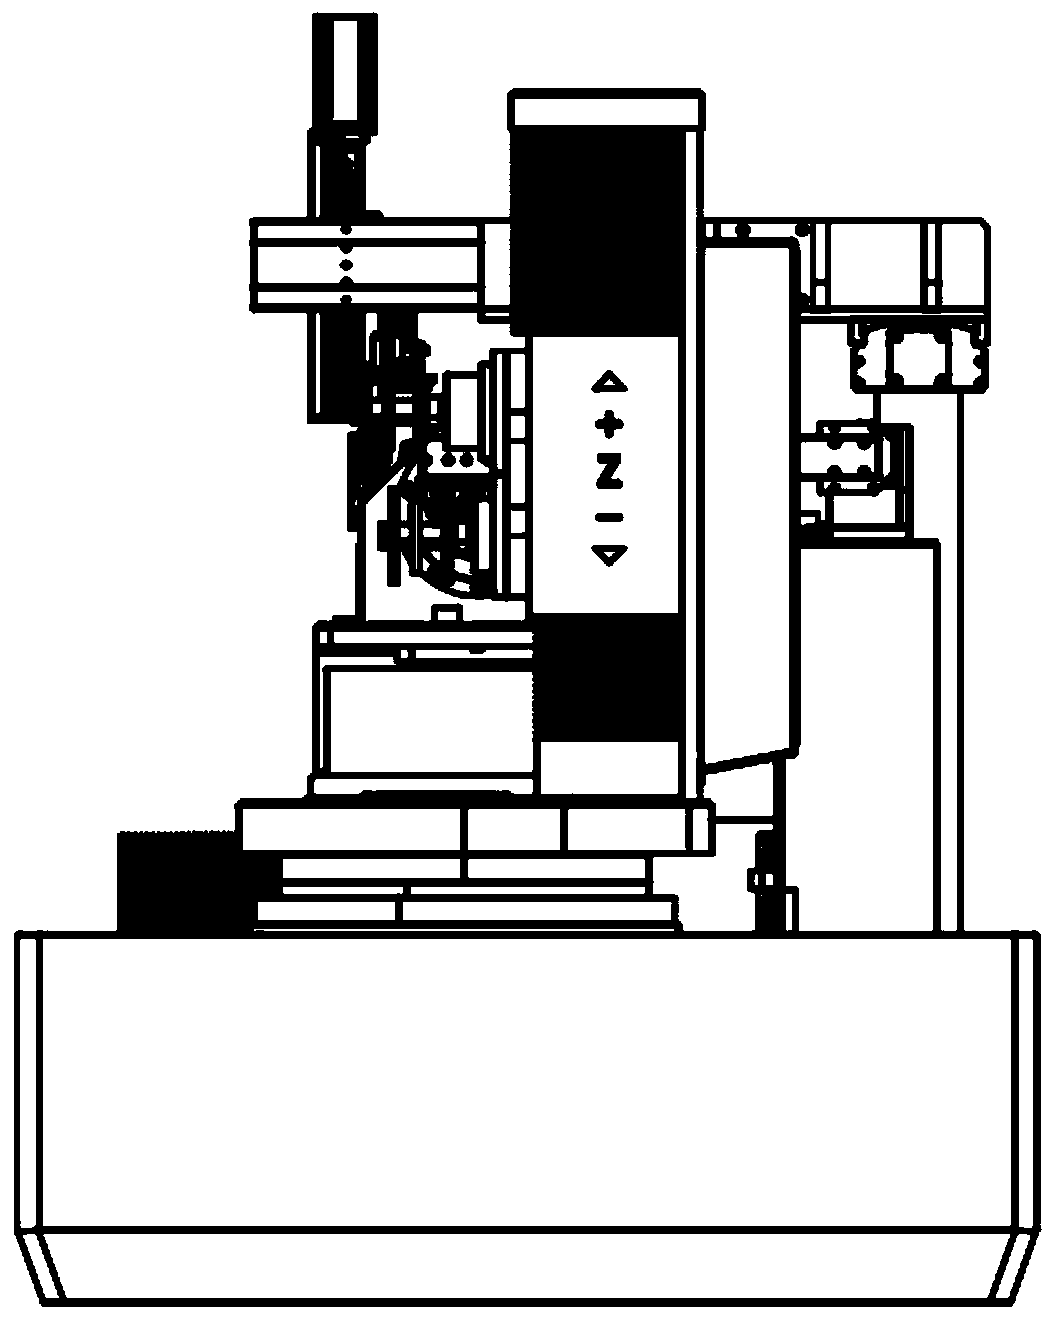 Automatic feeding and discharging mechanism for five-axis grinding machine